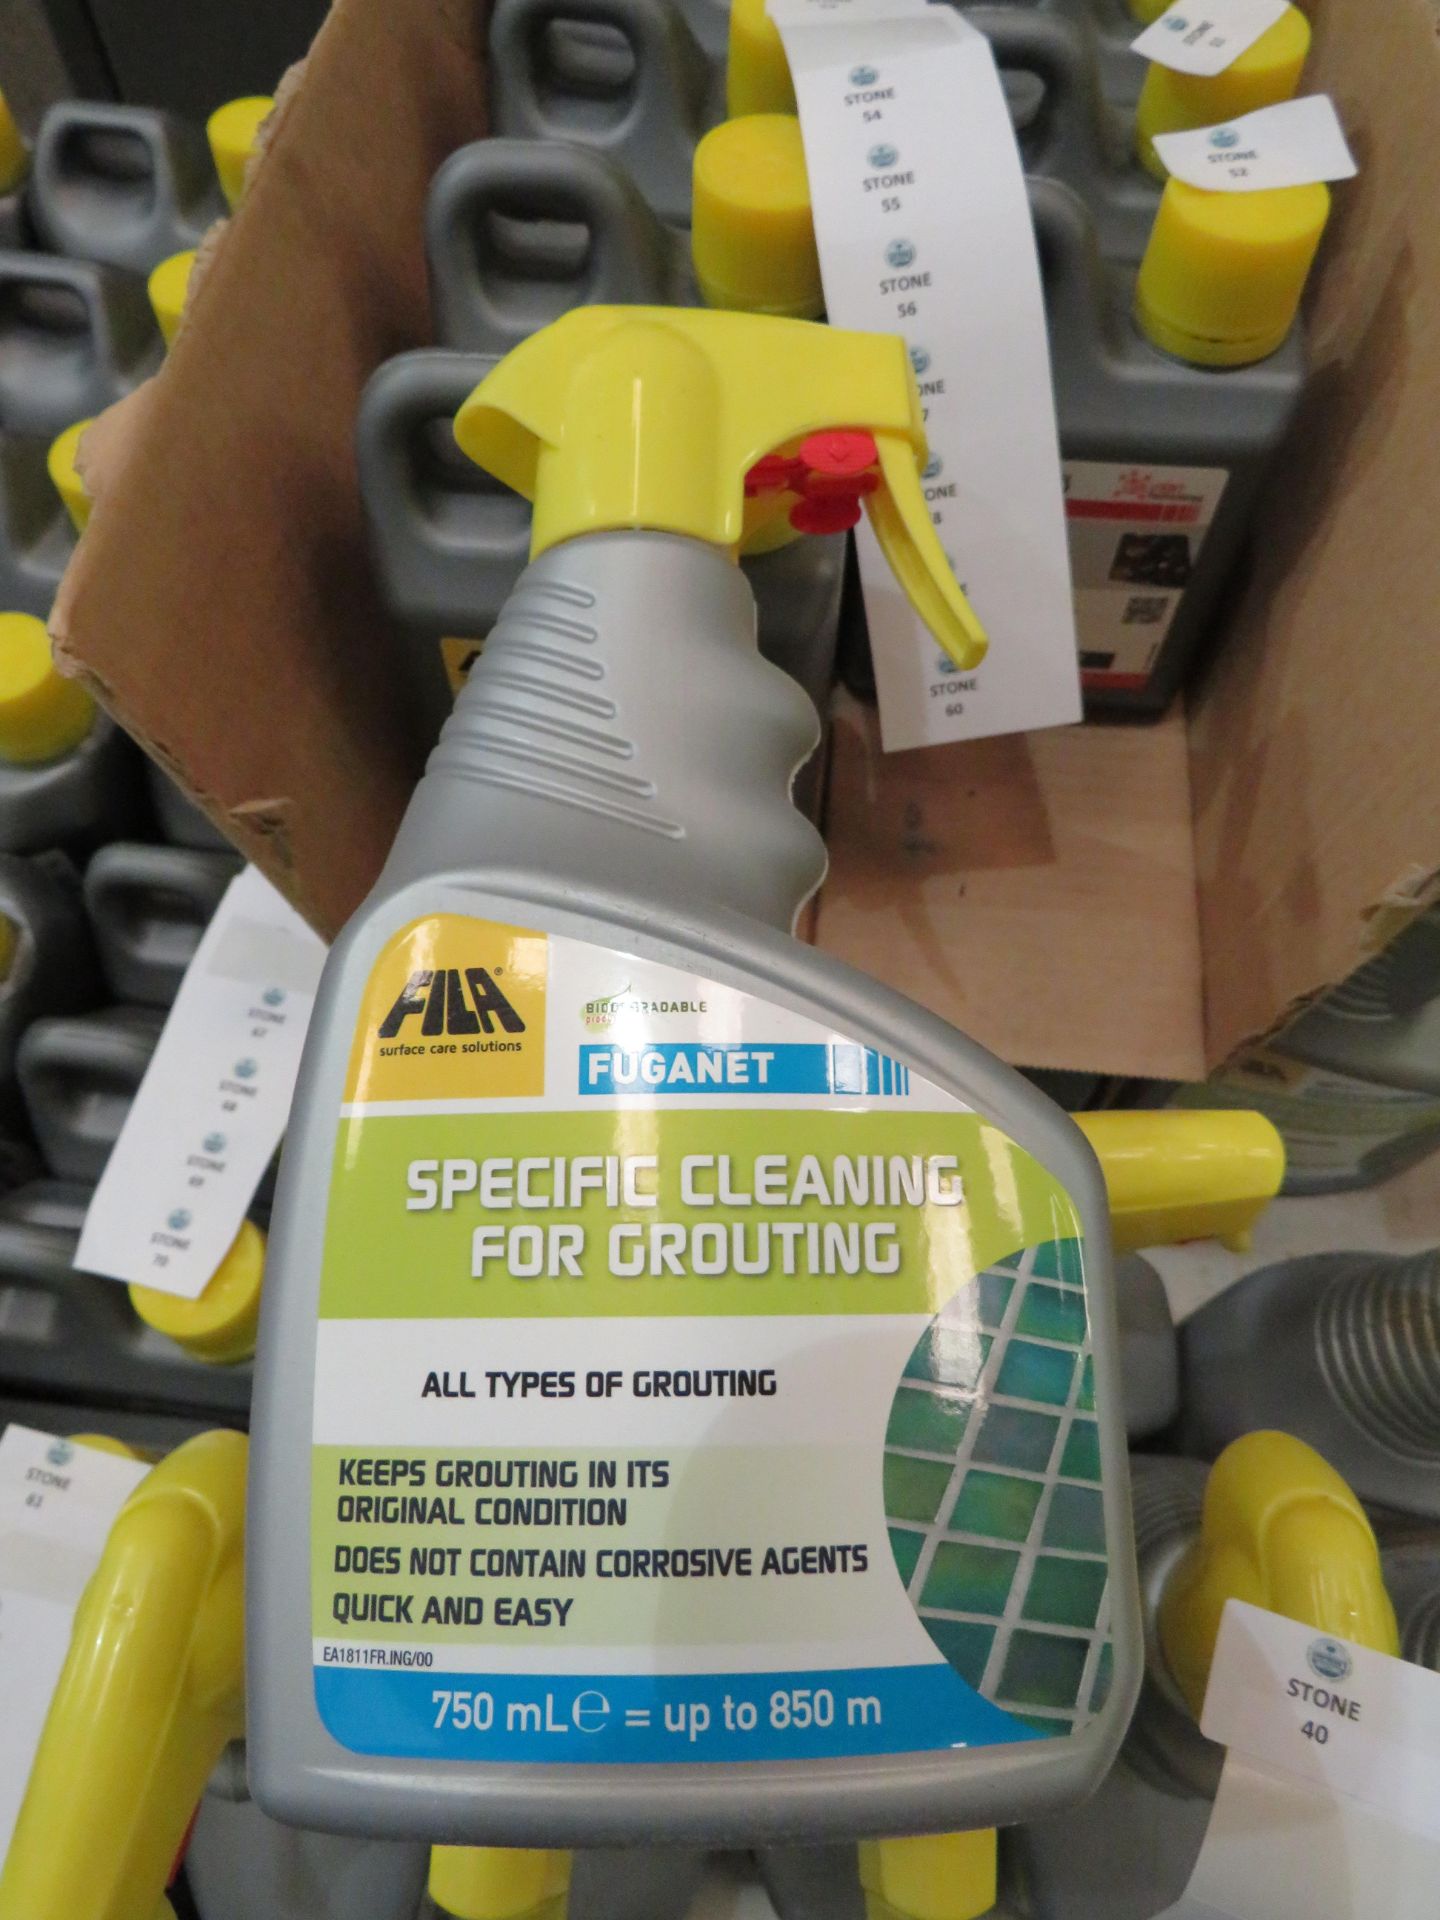 750ml spray bottle of Fila Fuganet specific cleaning for grouting